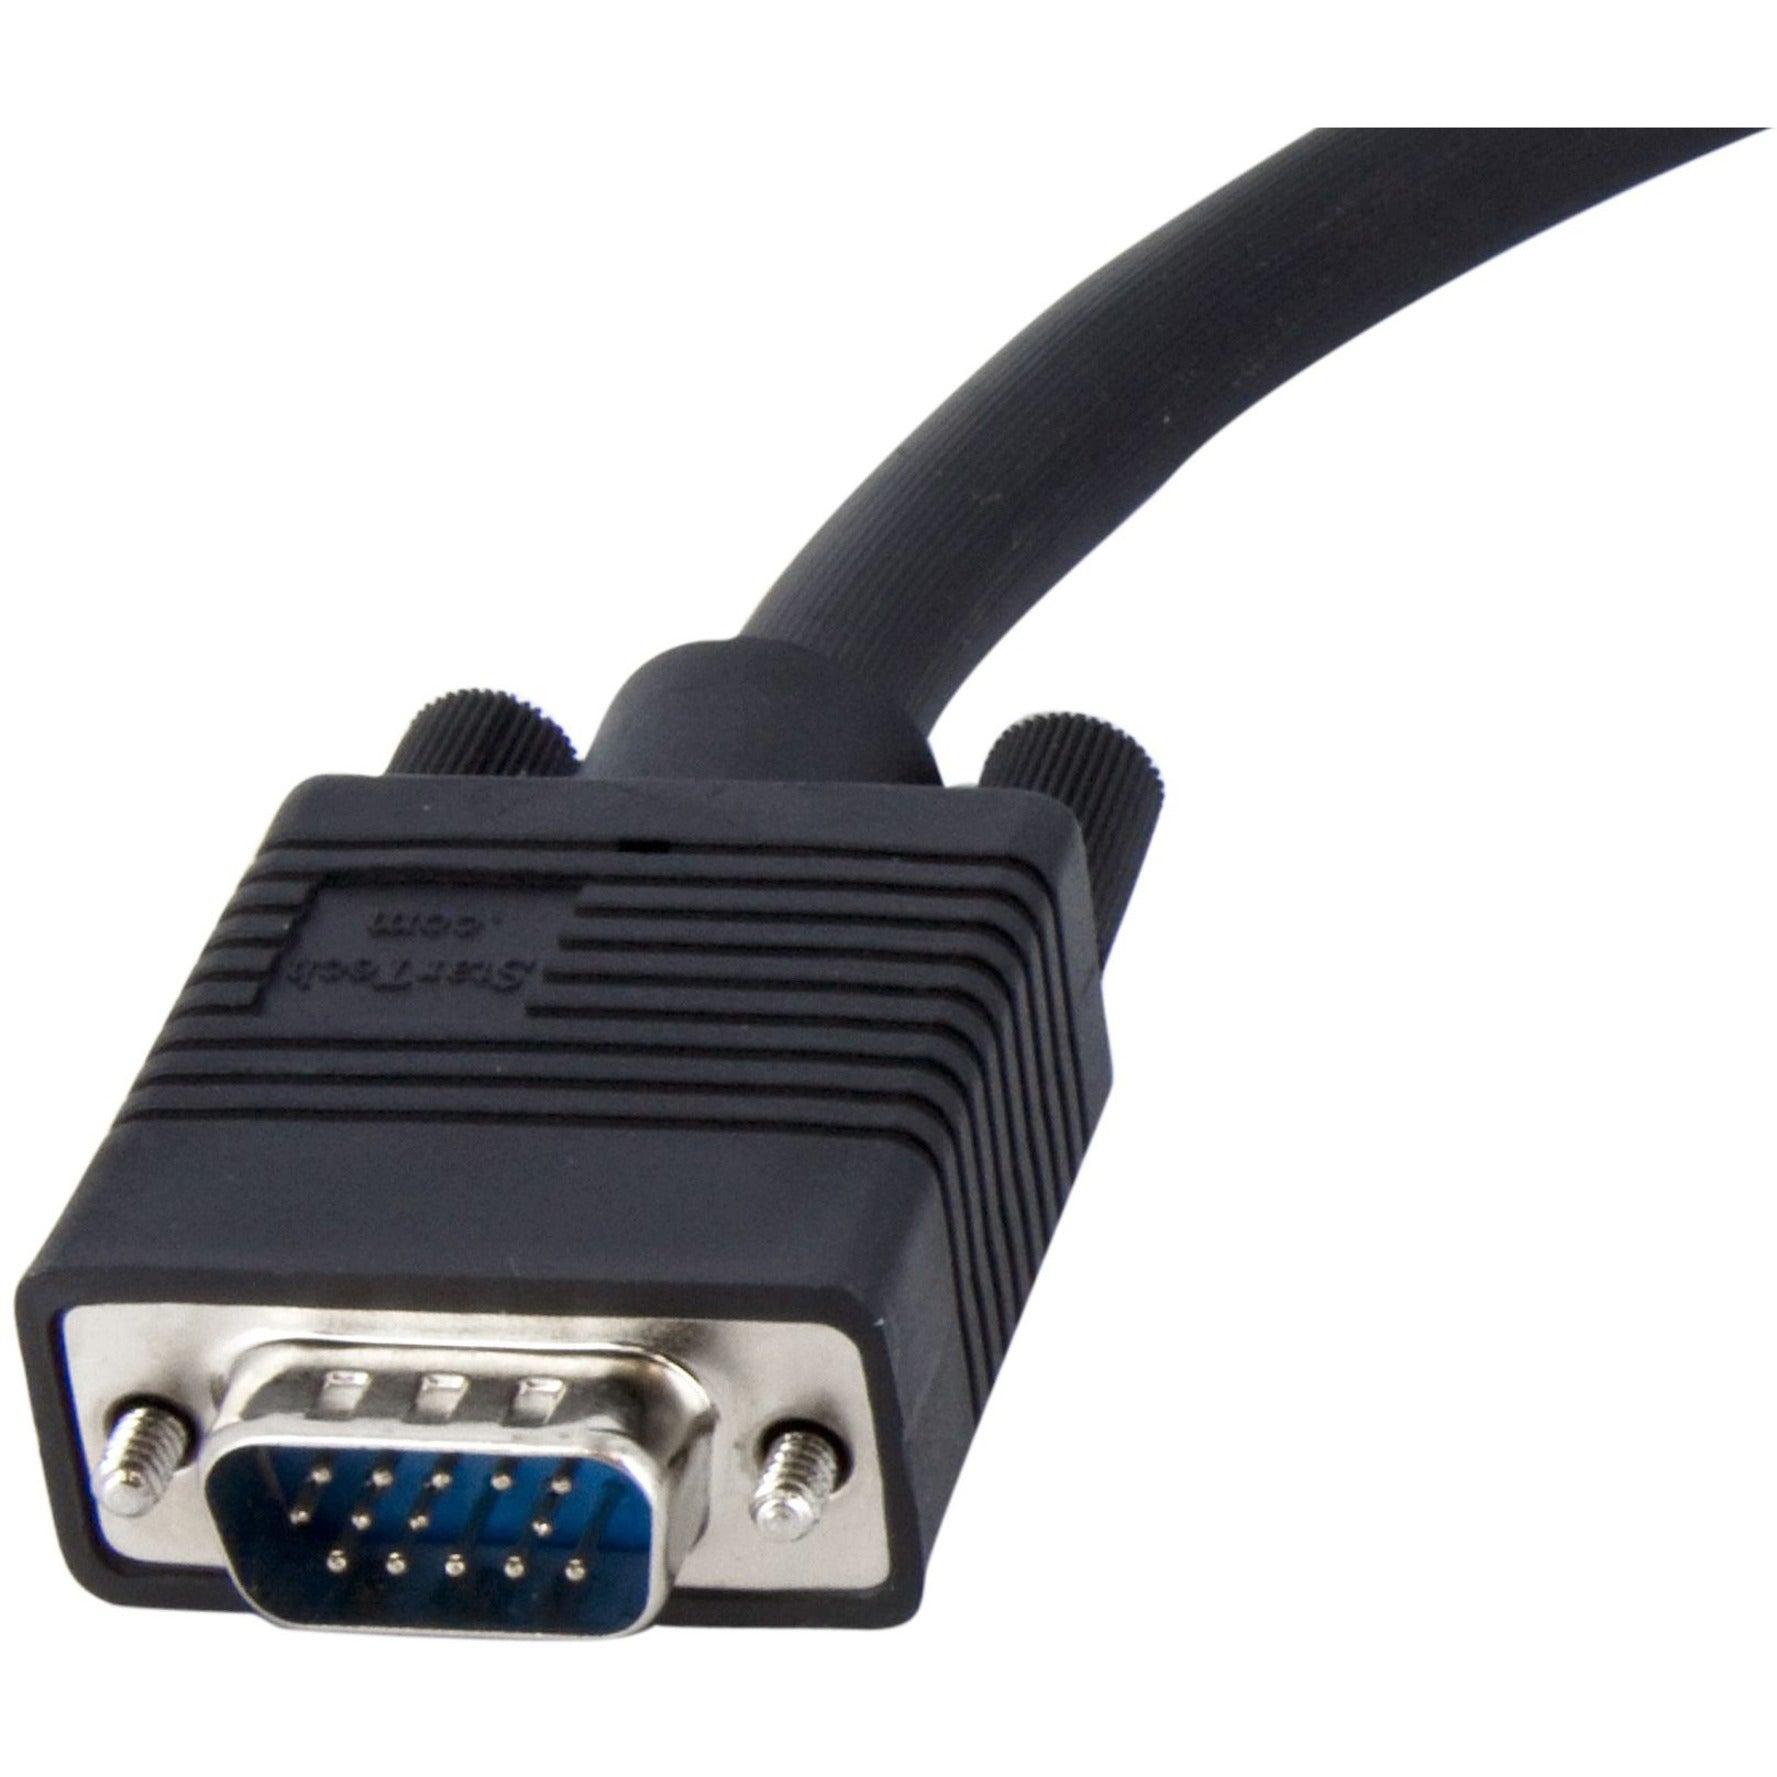 StarTech.com VGABNCMF1 1 ft Coax HD15 VGA to 5 BNC RGBHV Monitor Cable, Copper Conductor, CMG Rated